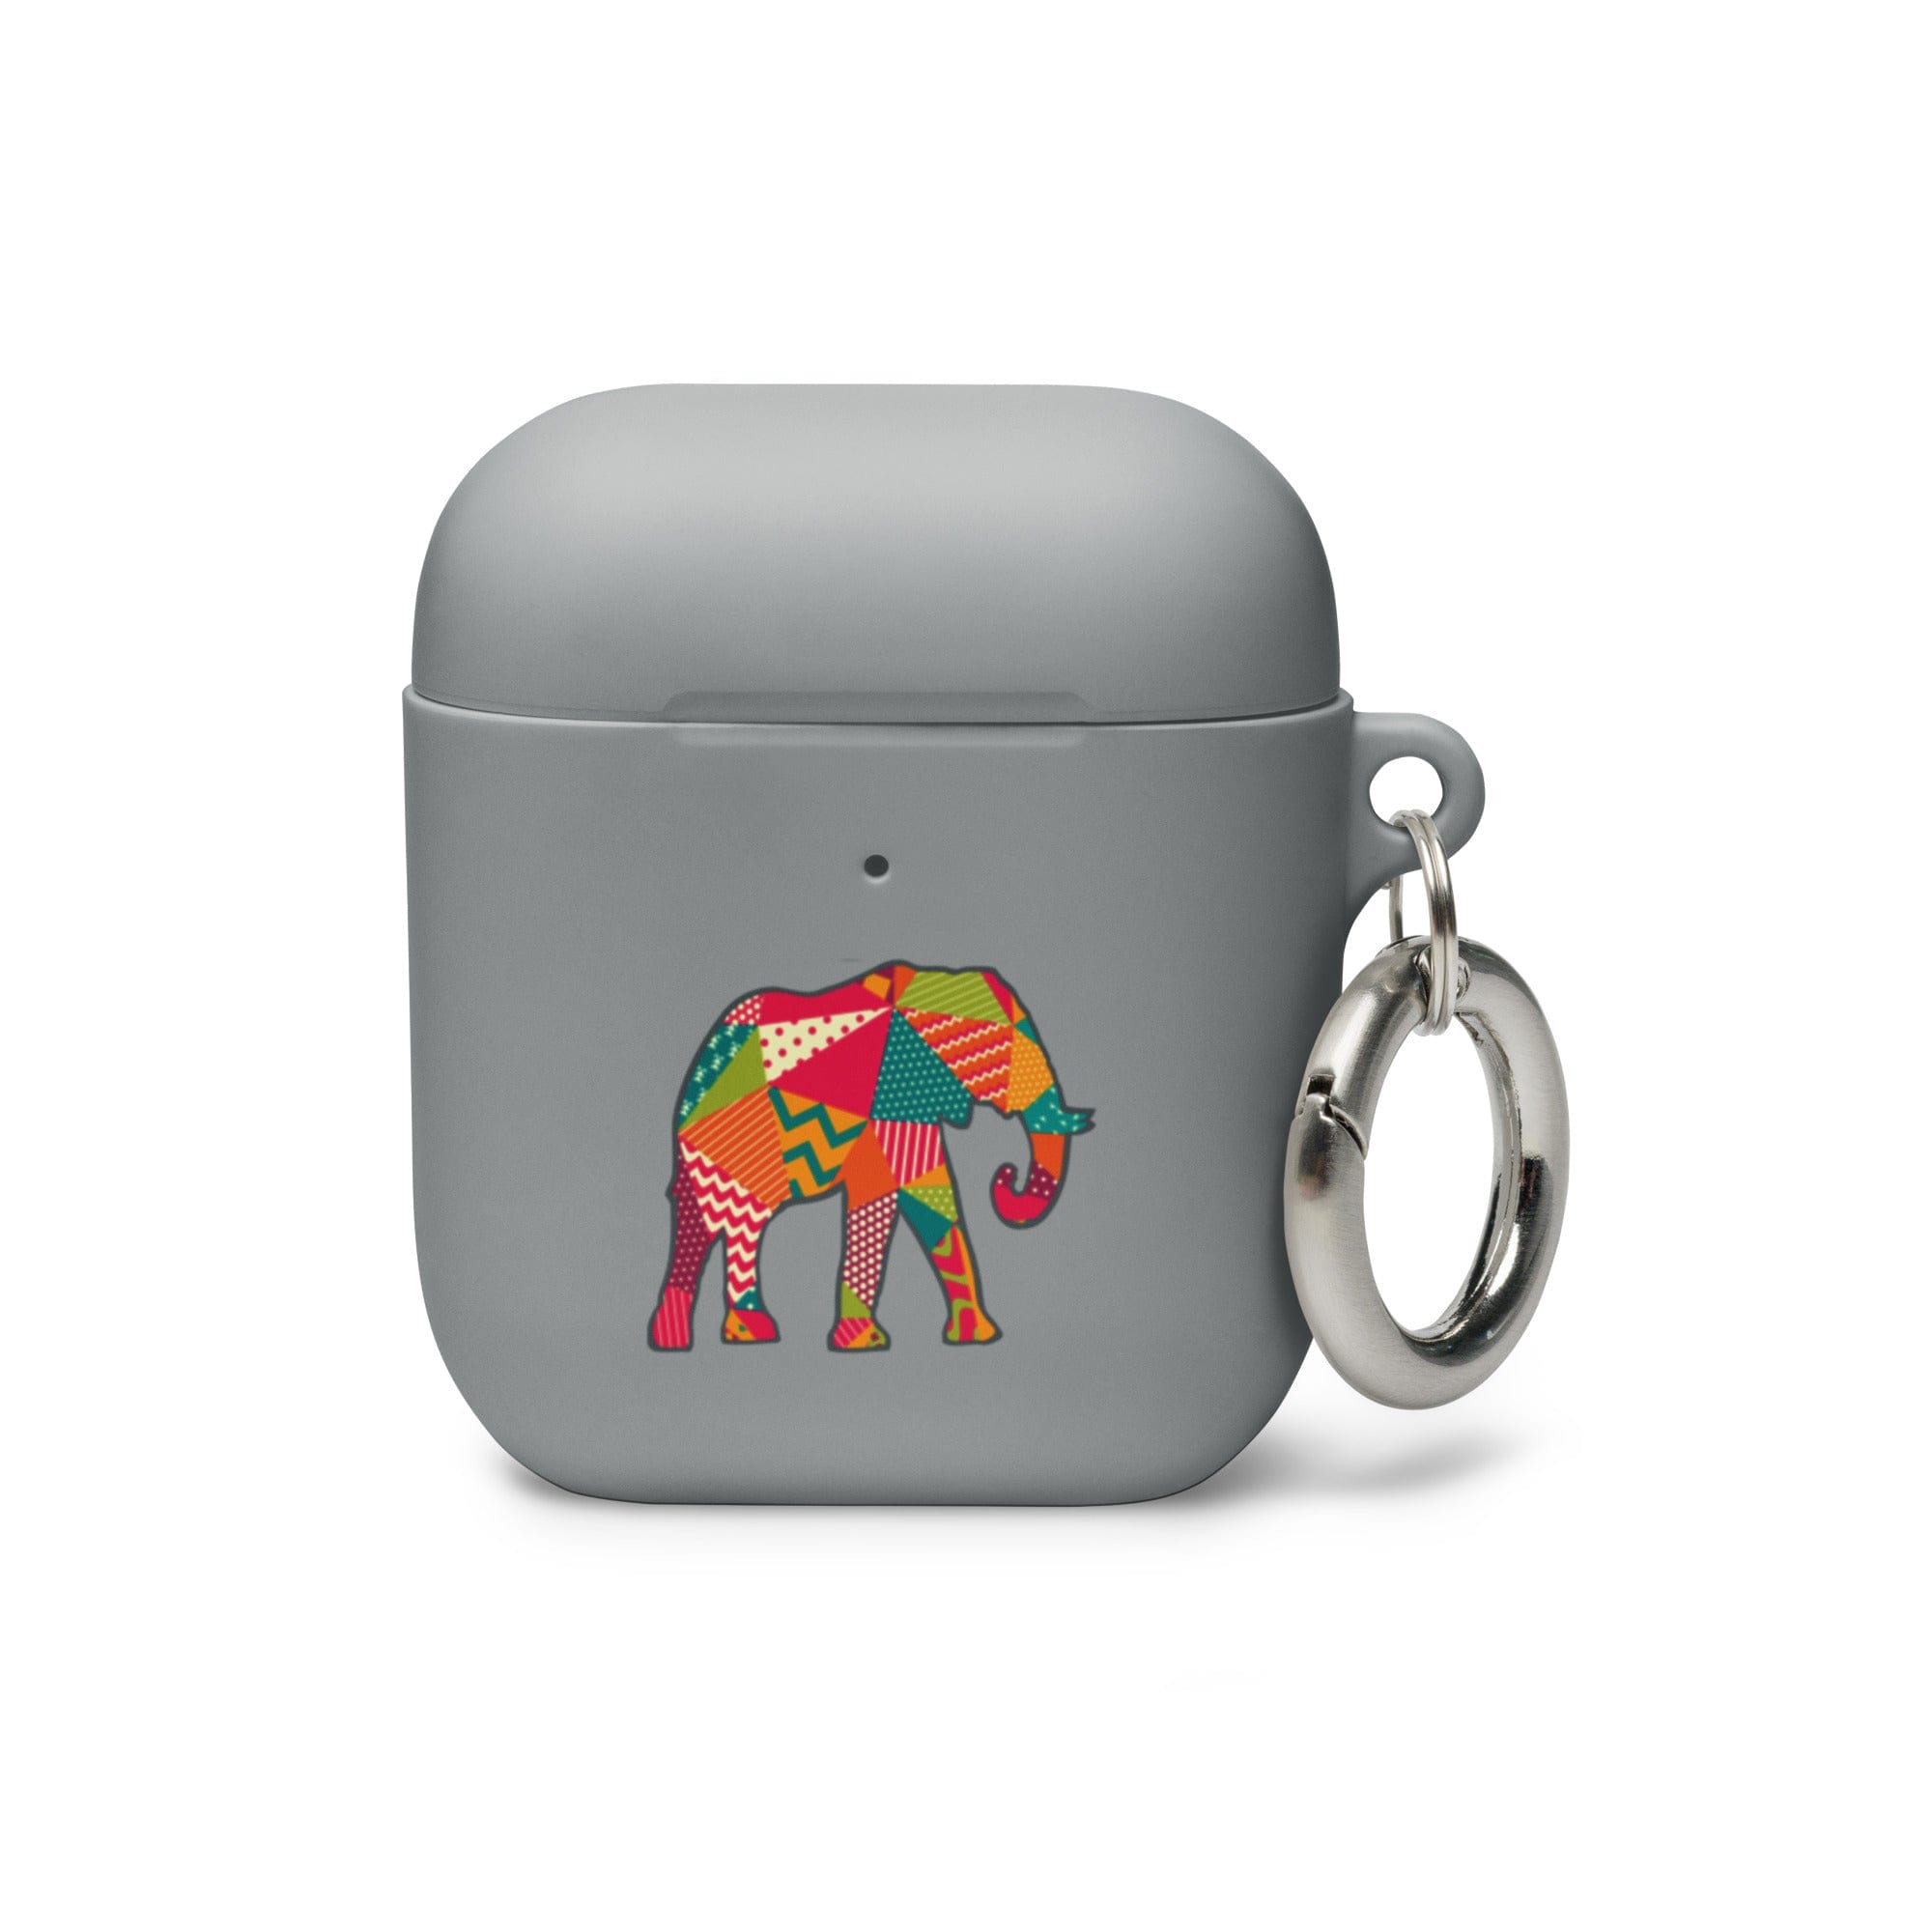 The Indian Elephant. From the Indian at Heart collection.